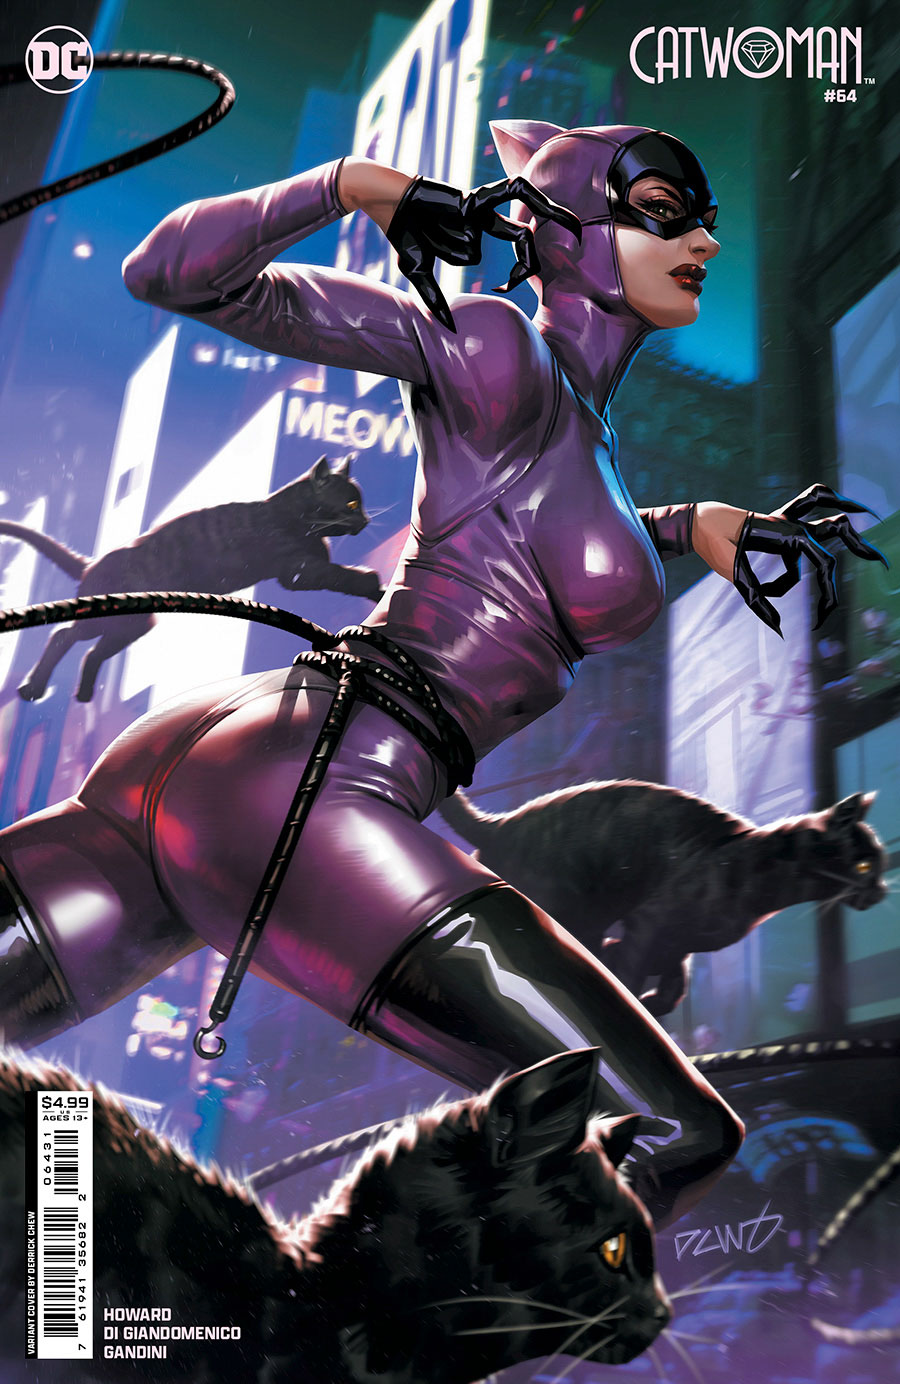 Catwoman Vol 5 #64 Cover C Variant Derrick Chew Card Stock Cover